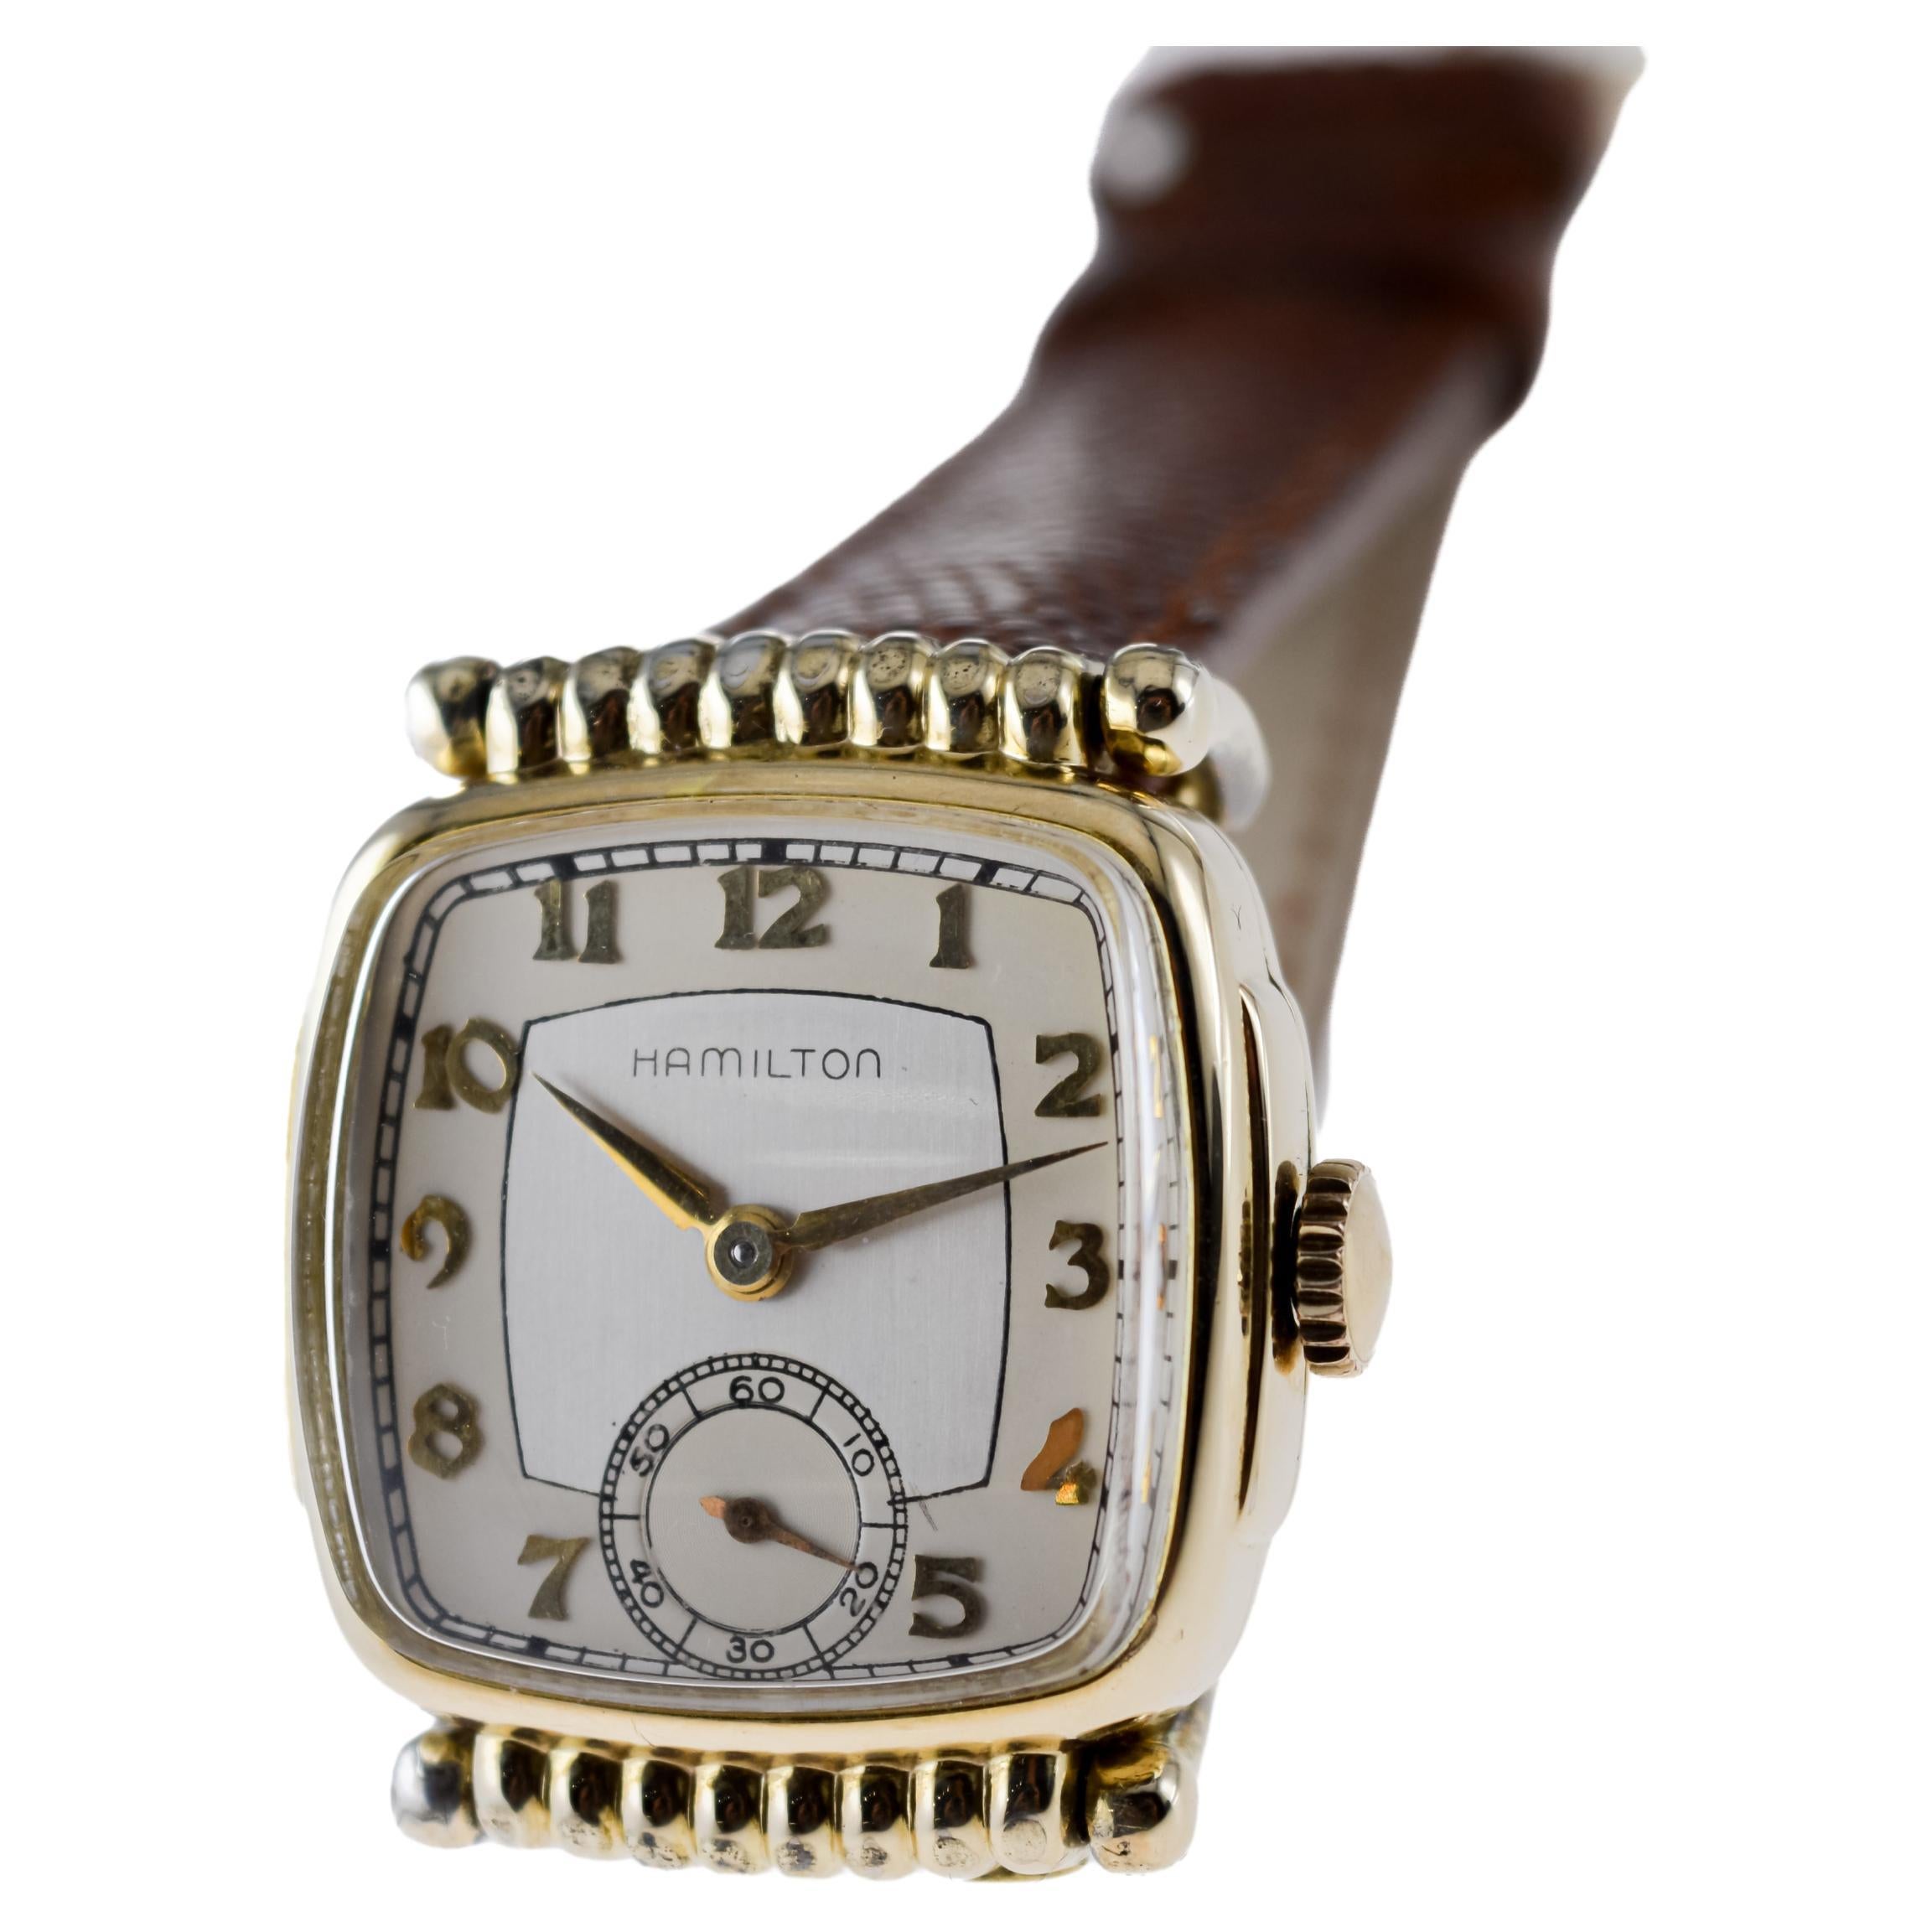 Hamilton Gold-Filled Art Deco Watch with Articulating Lugs 1940's For Sale 2